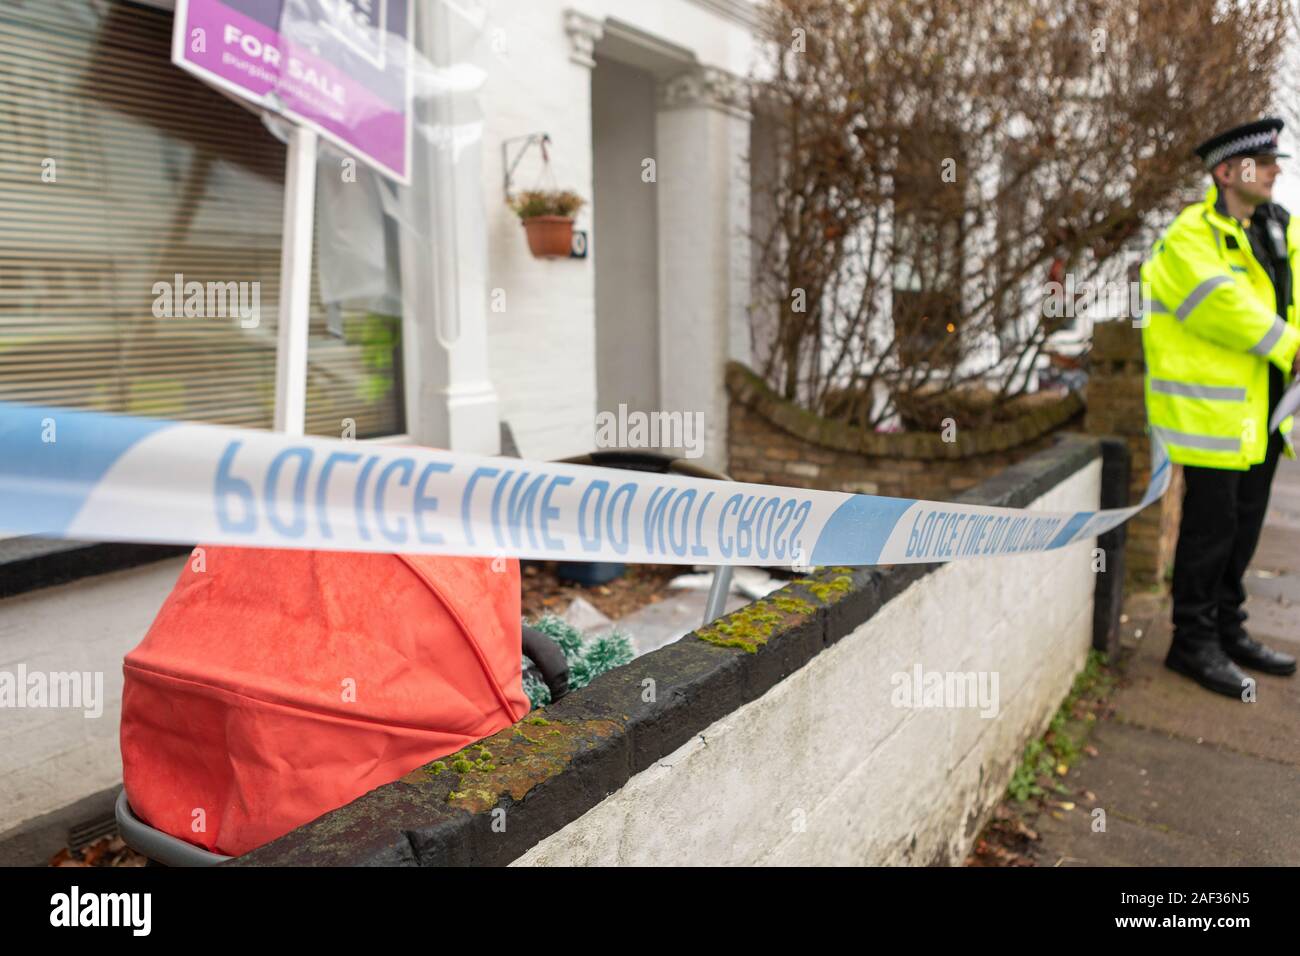 Westcliff on Sea, UK. 12th Dec, 2019. Forensic and Police officers officer's on the scene at a murder investigation. Essex Police were called at approximately  4.30am this morning to reports of a disturbance at an address in Tintern Avenue, Westcliff. Nearby alley ways are sealed off, and forensic officers searching a house in the road. Penelope Barritt/Alamy Live news. Stock Photo